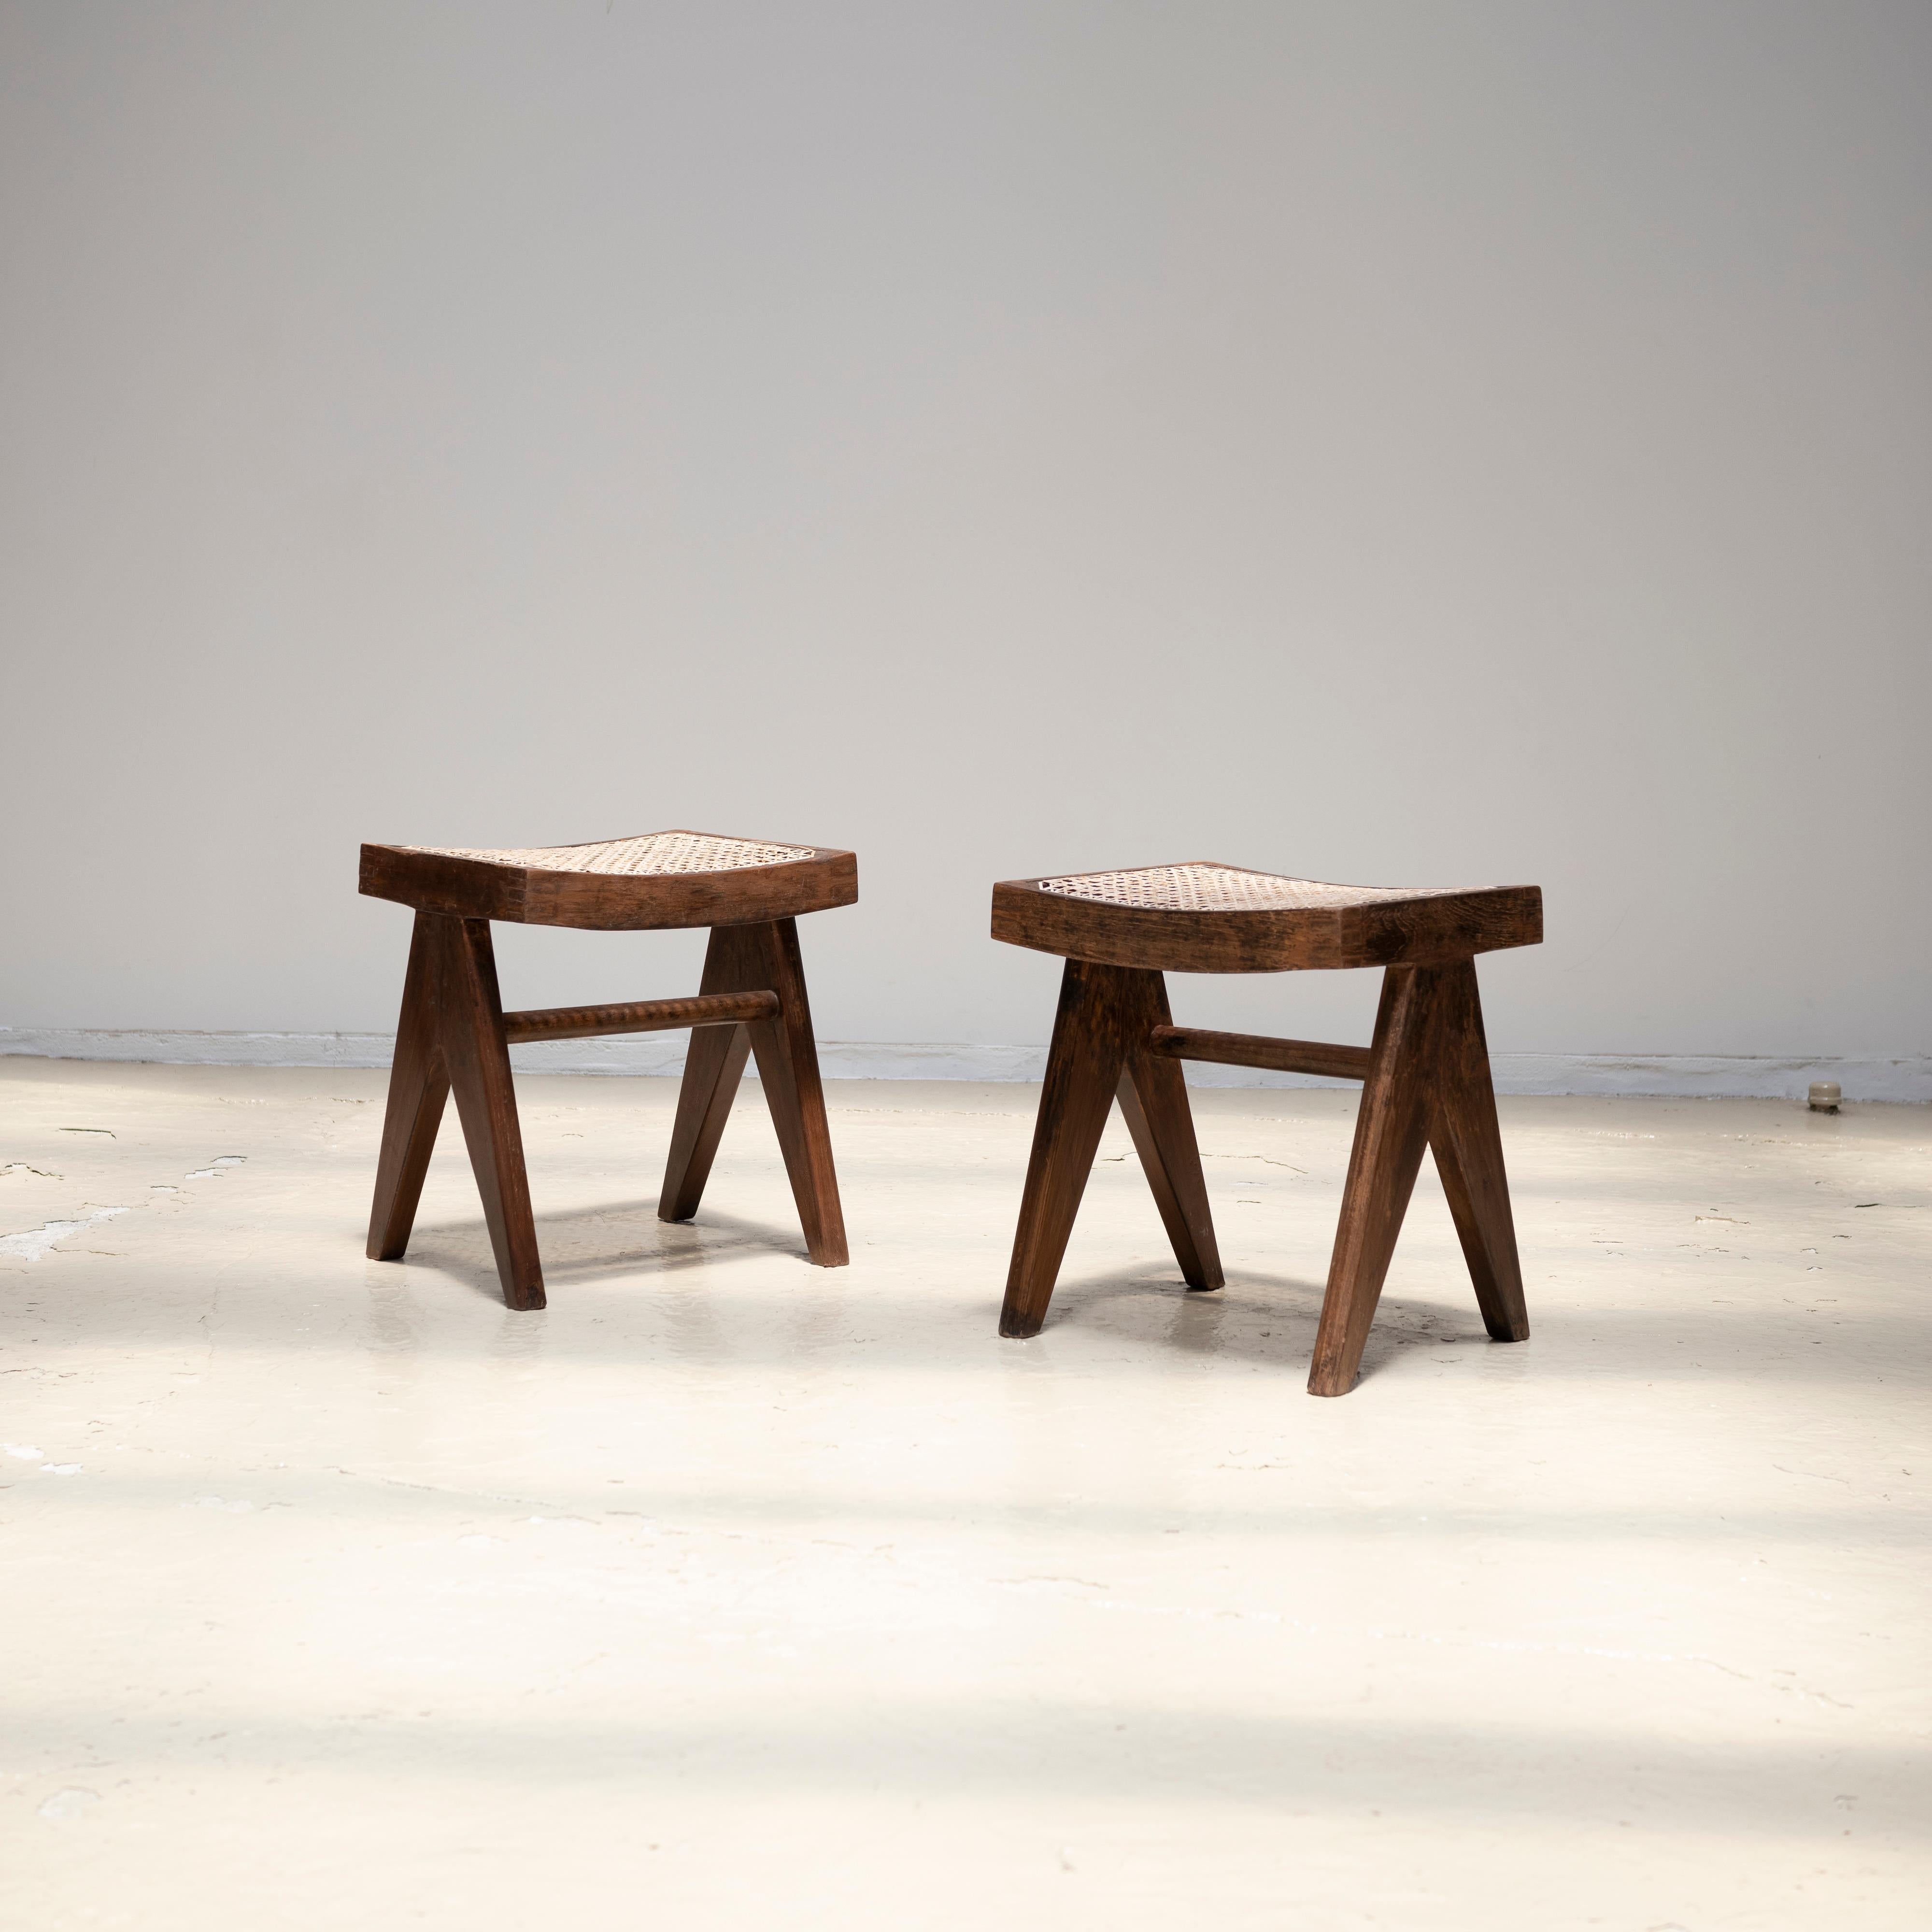 A-legs low stools in solid teak and braided canework designed by Pierre Jeanneret in 1955-56.

Provenance: Post-Graduate Institute, Chandigarh,
Quantity: 1.  ( 1 sold out)